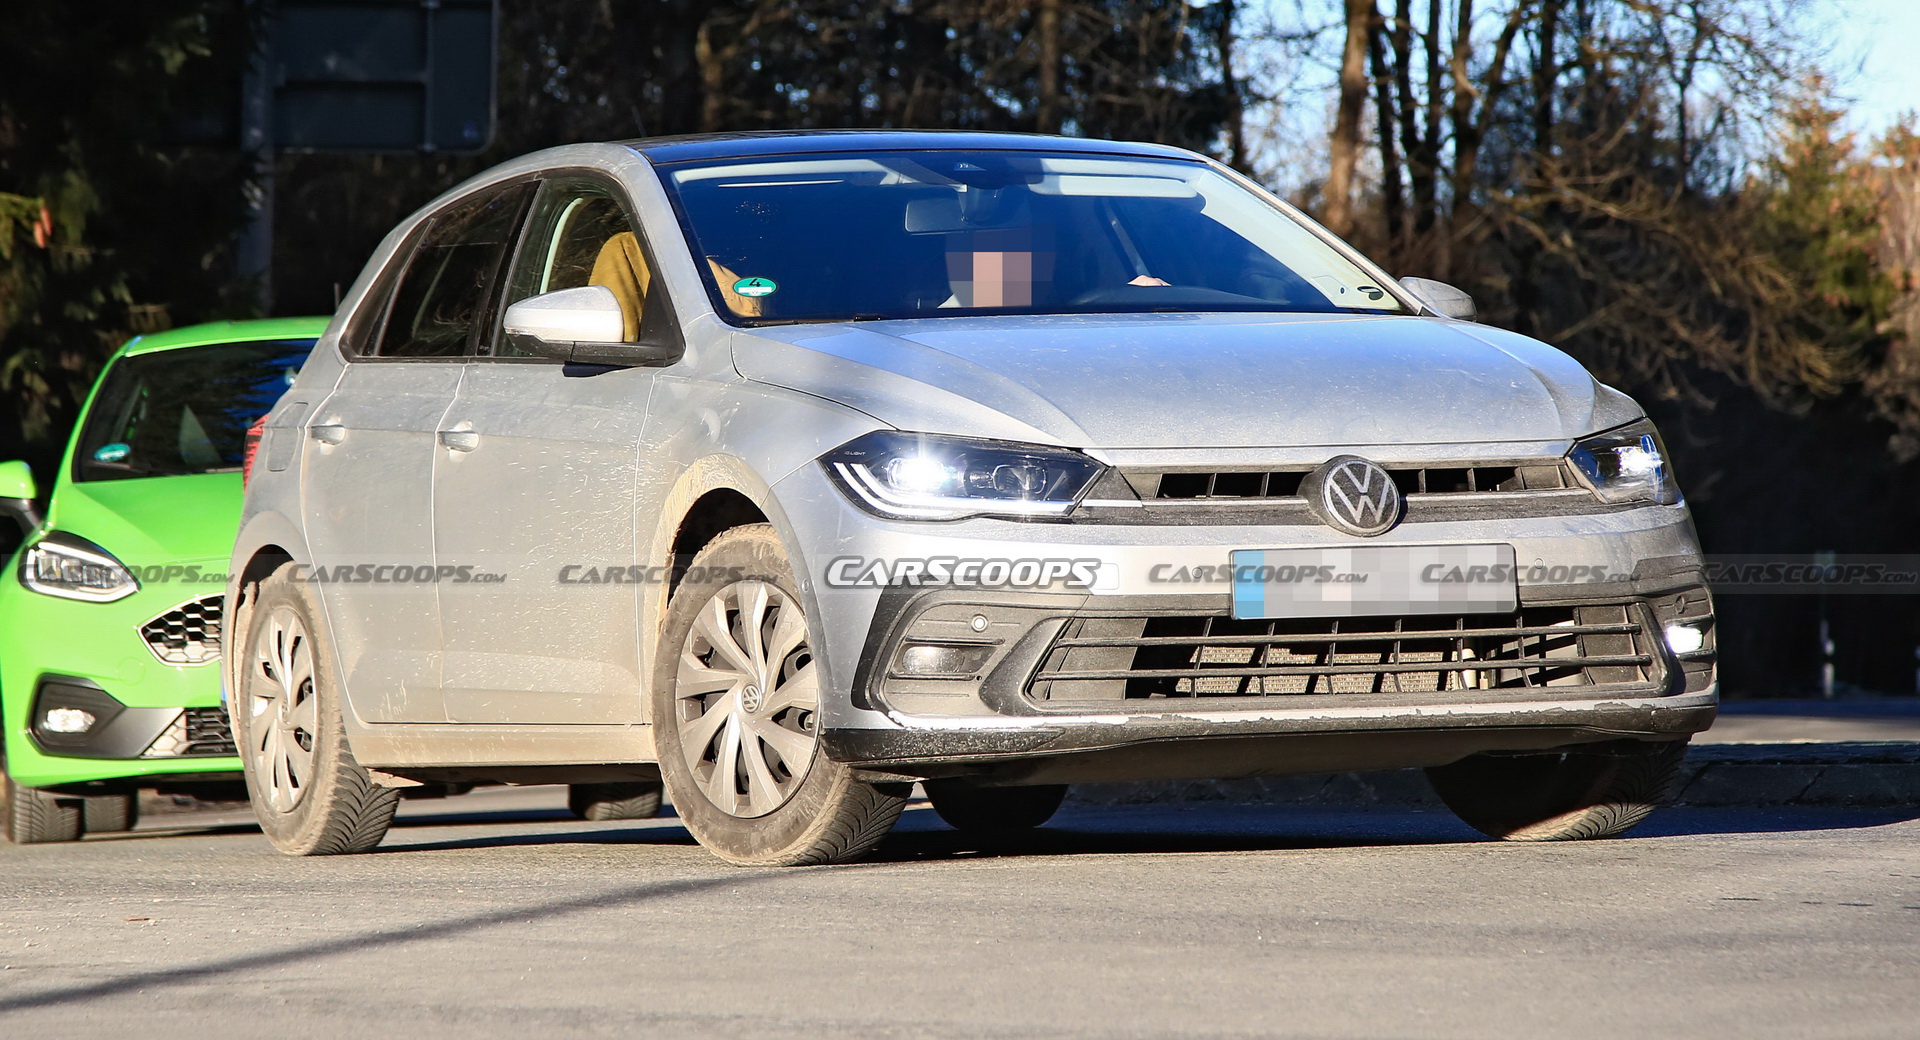 2021 Vw Polo Facelift Caught With Minimal Camo Ahead Of April 22 Debut